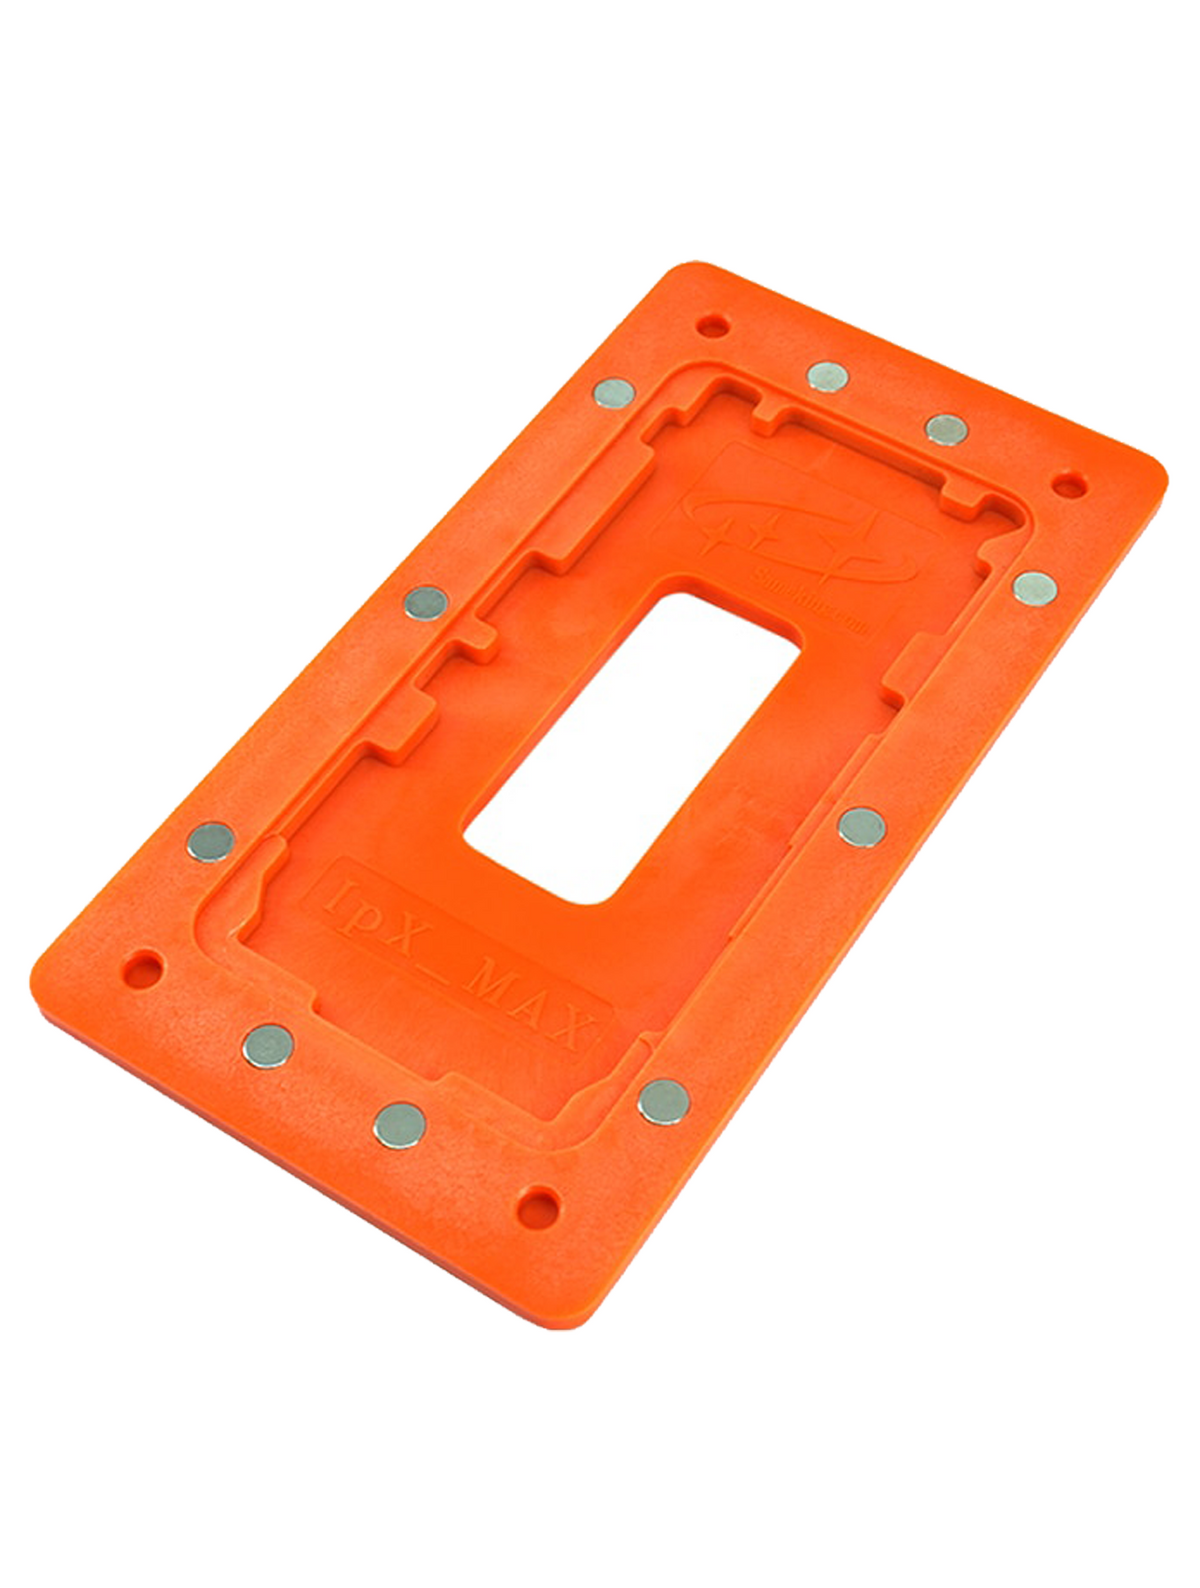 MAGNETIC FRAME CLAMPING MOLD FOR IPHONE 11 PRO MAX